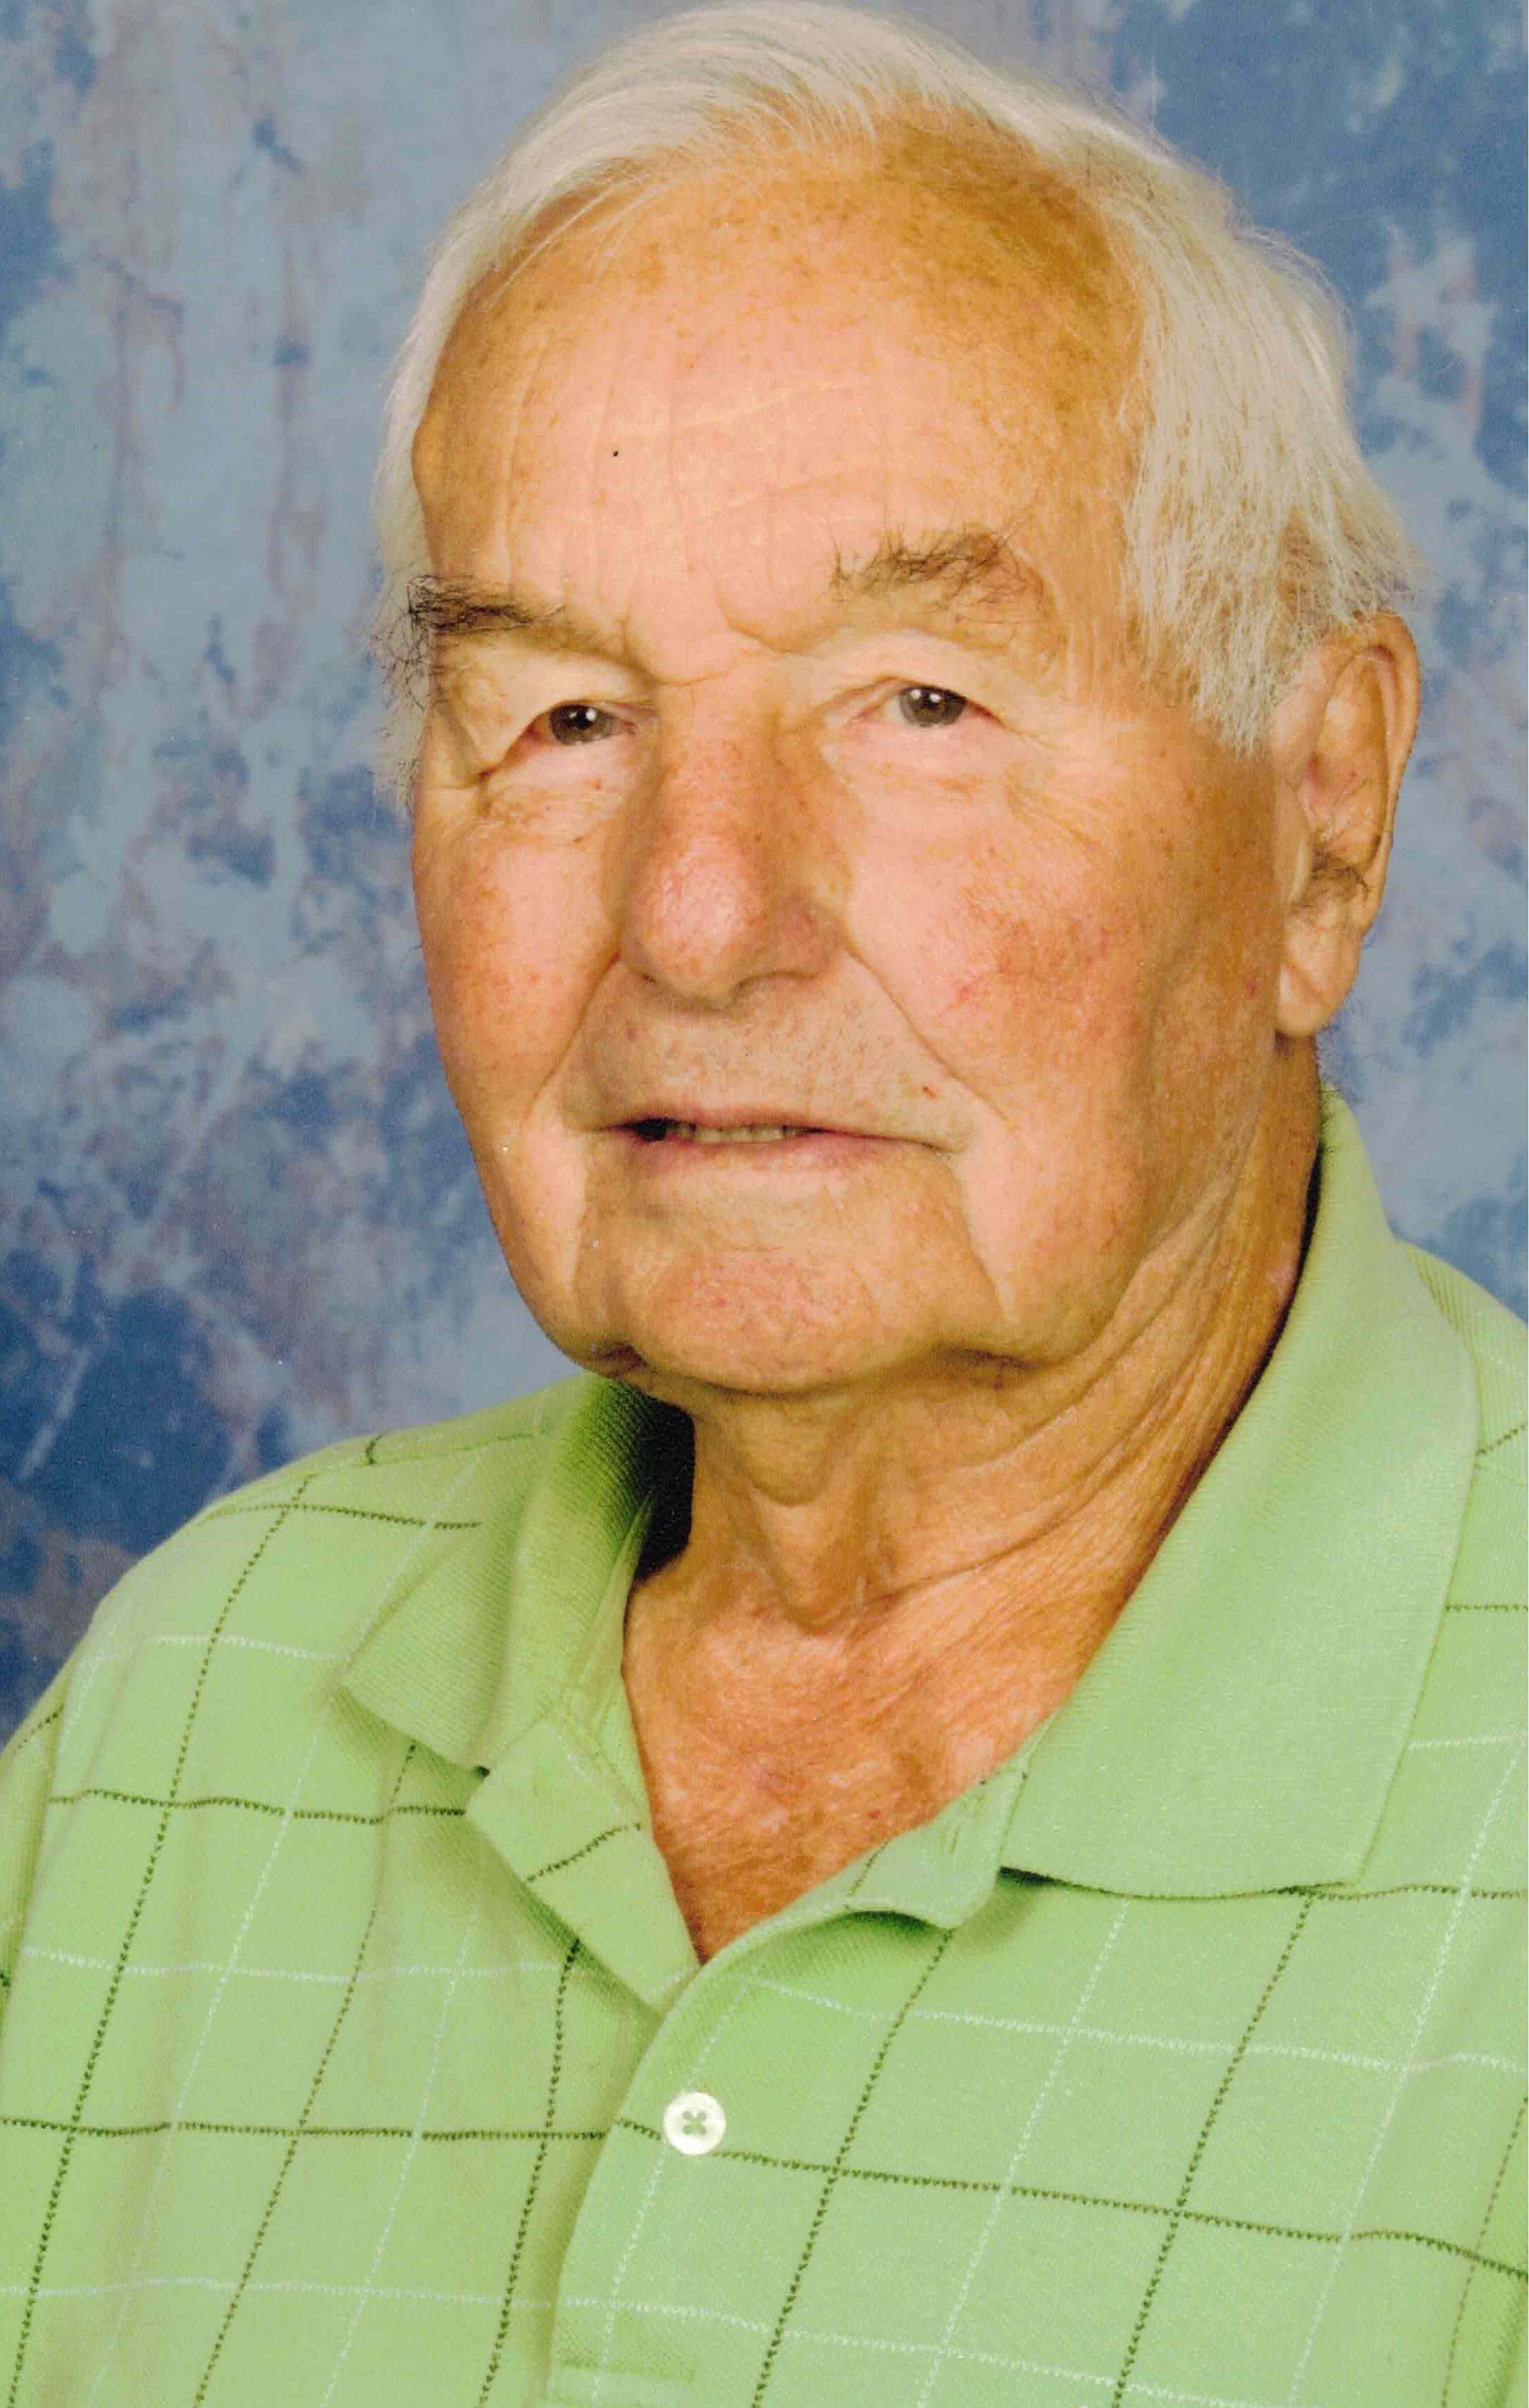 BAKKER: Durk of Townsend, formerly of Exeter, and Grand Rapids, Michigan